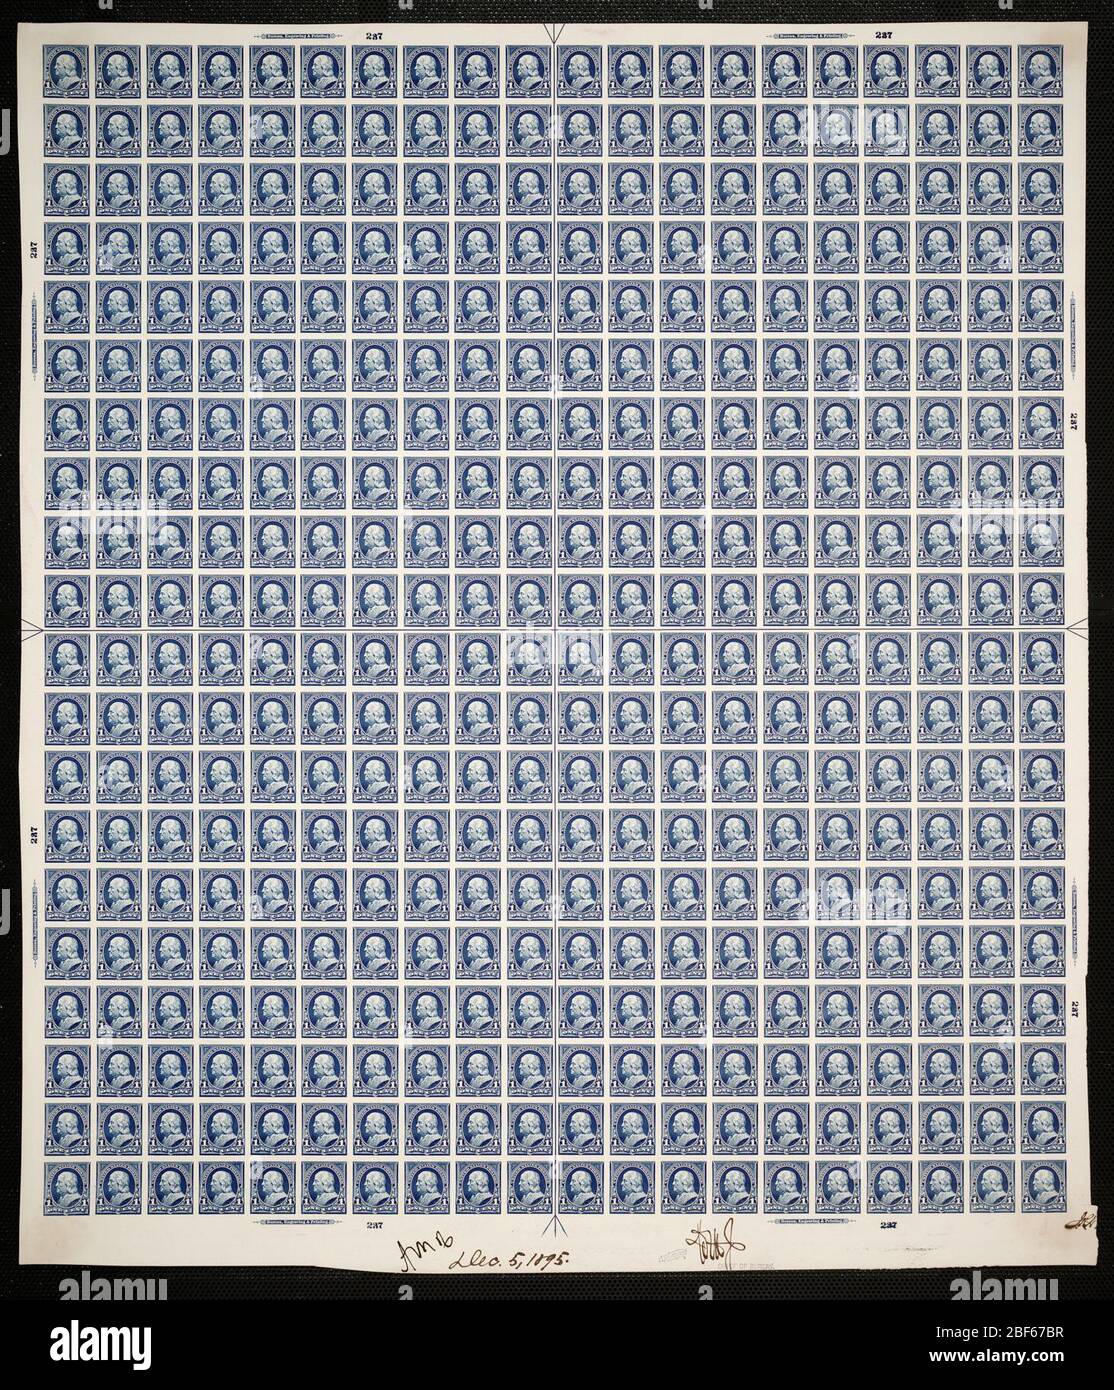 1c Franklin plate proof. Certified plate proofs are the last printed proof of the plate before printing the stamps at the Bureau of Engraving and Printing. These plate proofs are each unique, with the approval signatures and date. Stock Photo